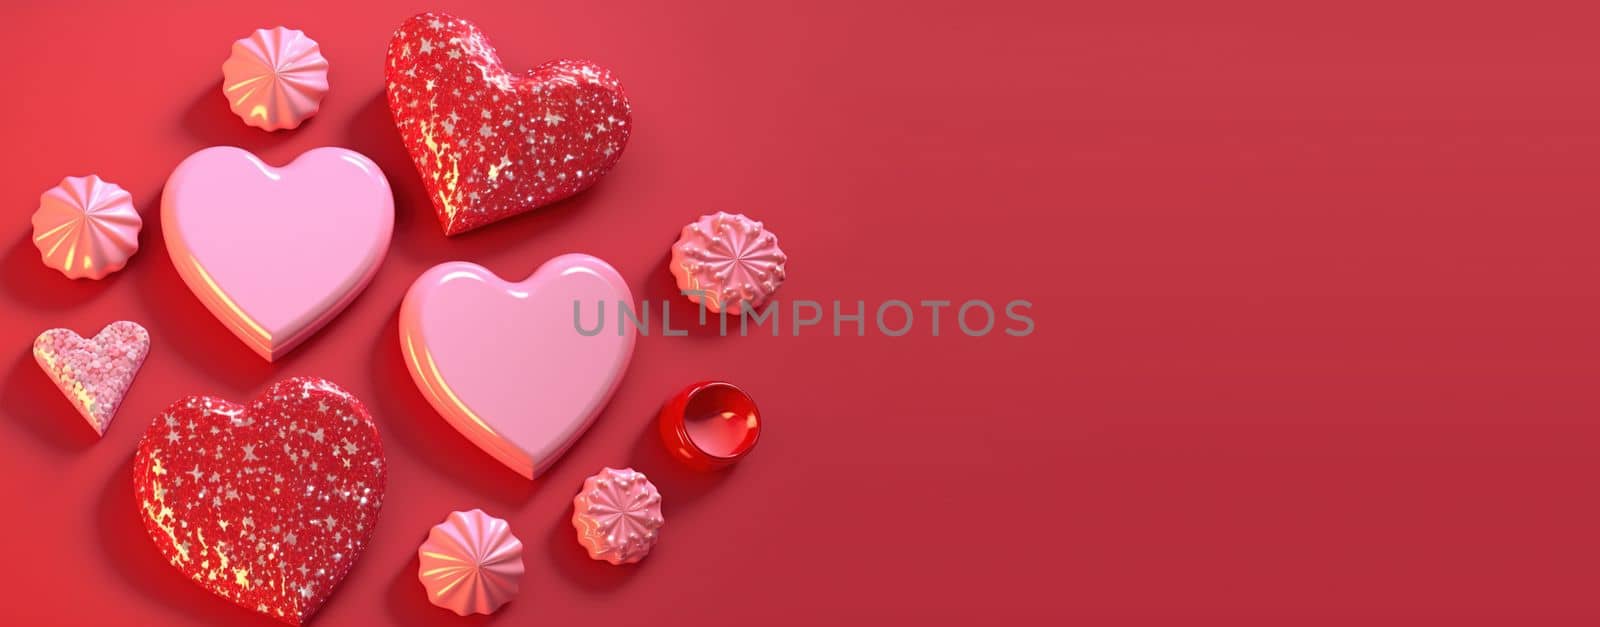 Elegant 3D Heart, Diamond, and Crystal Design for Valentine's Day Greetings by templator